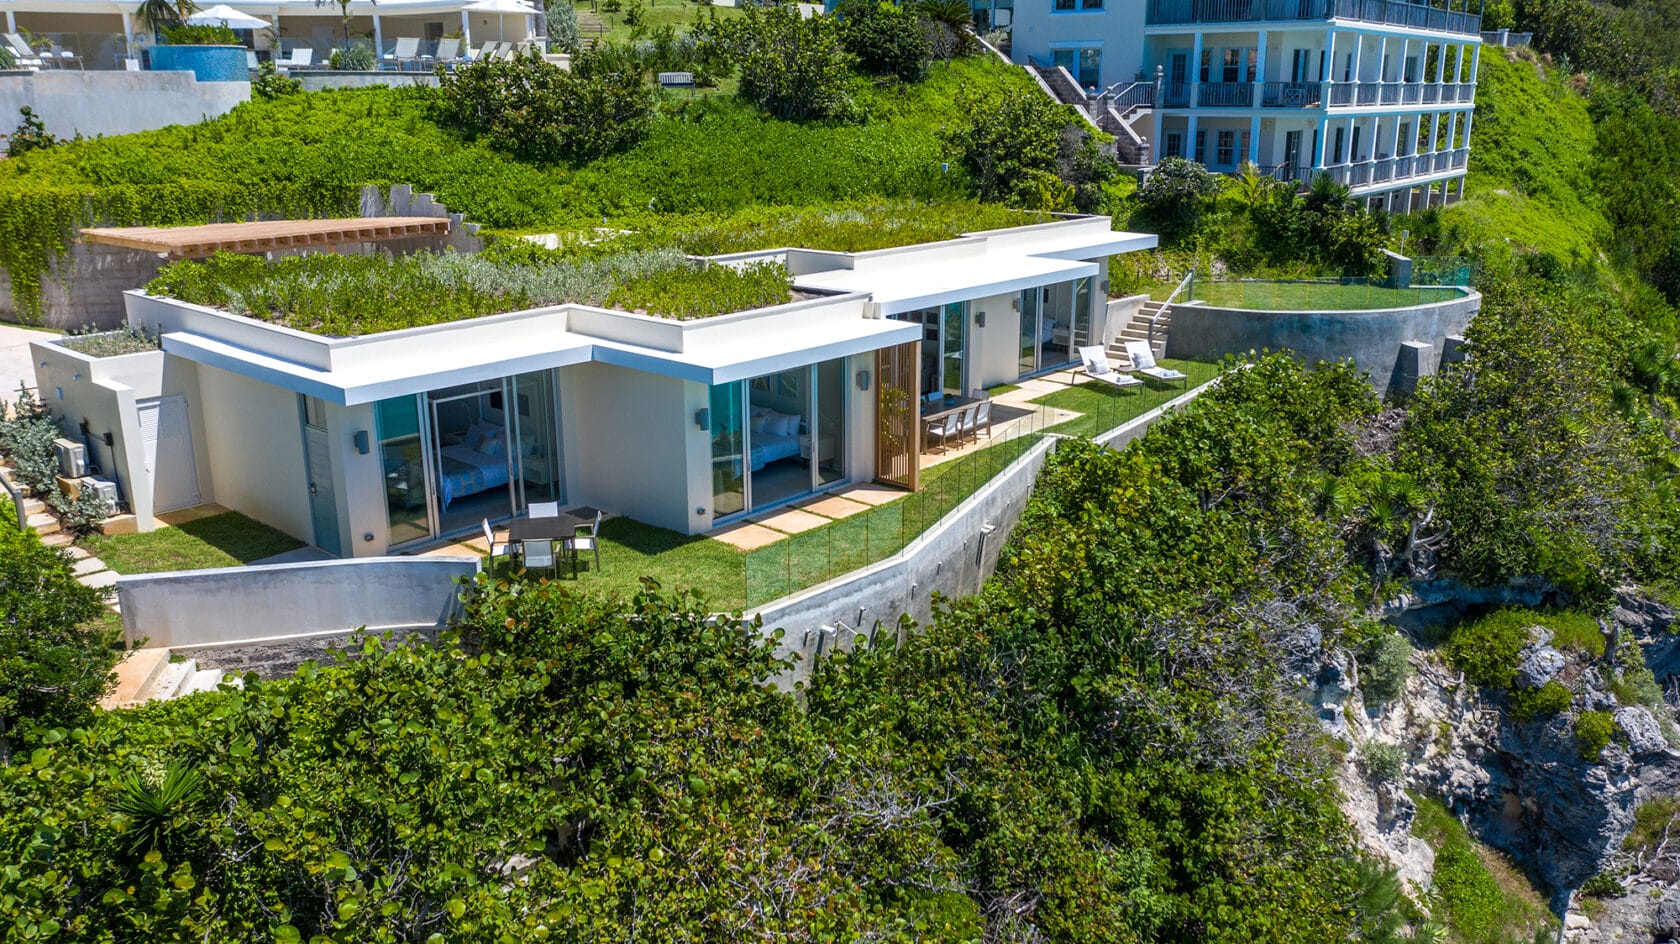 A house on a cliff overlooking the ocean in Bermuda.